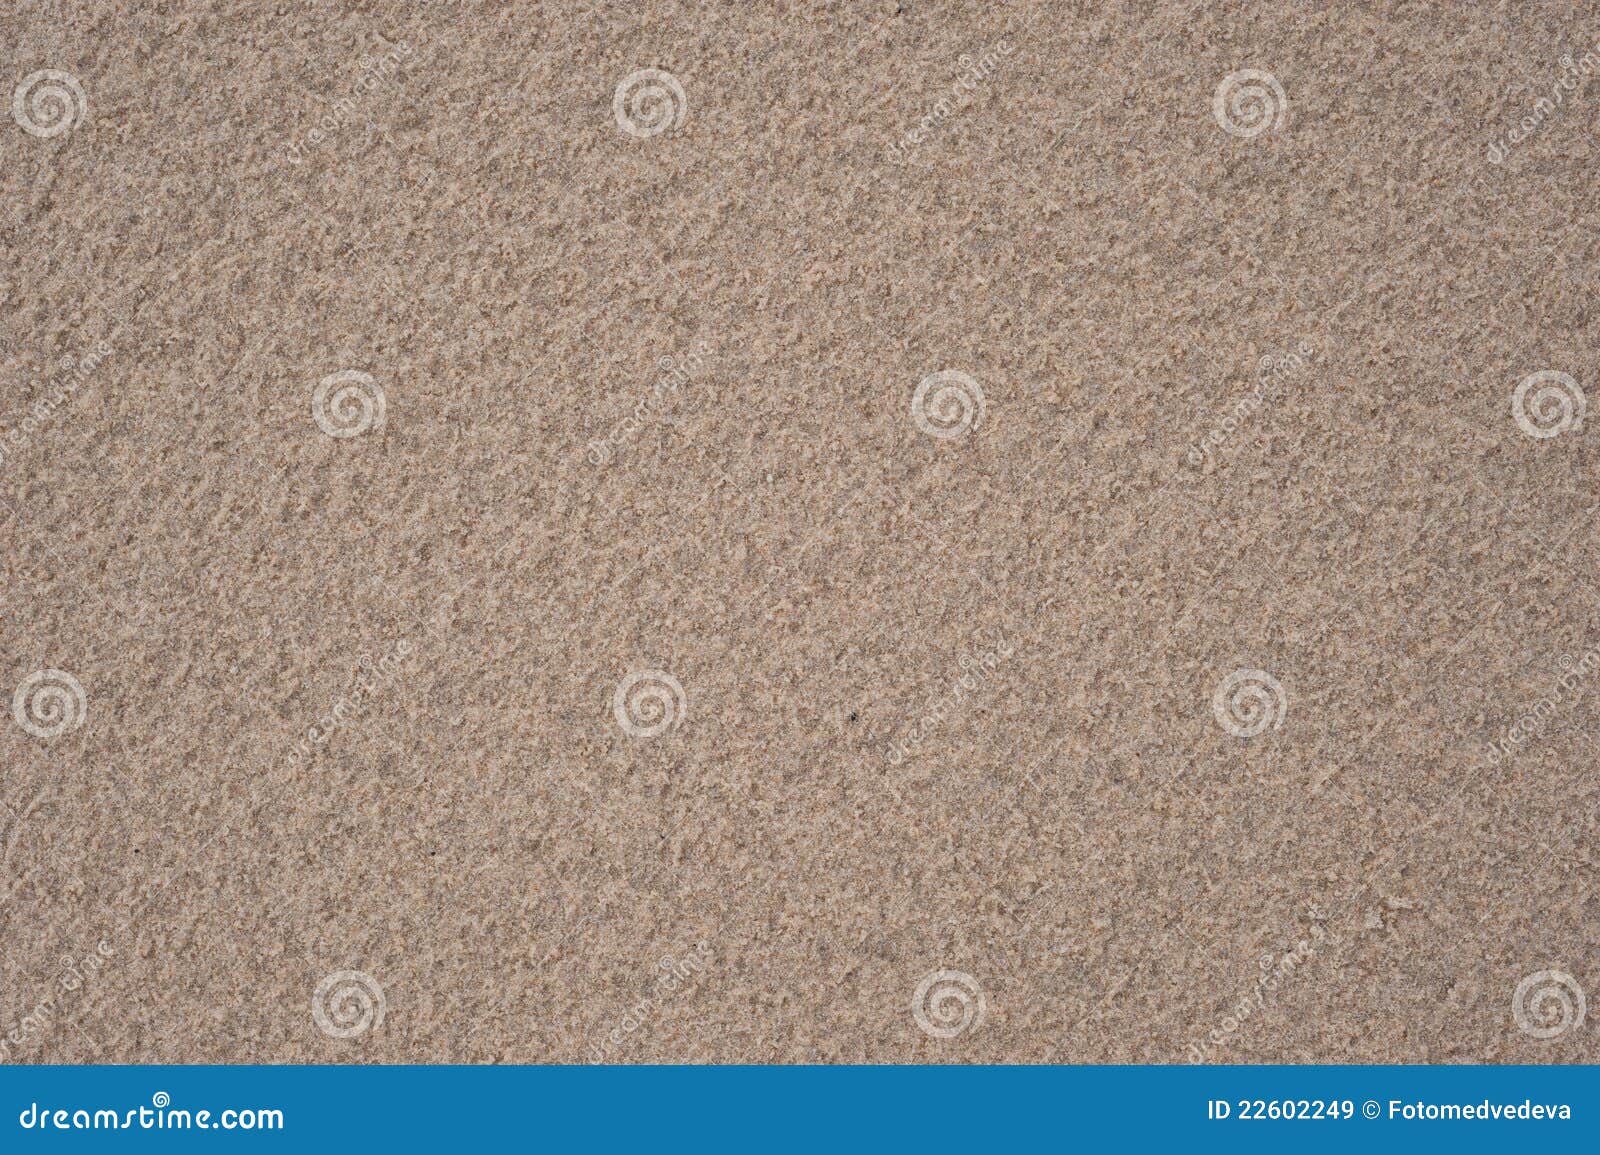 Sand after rain. Beige background of wet sand with a relief